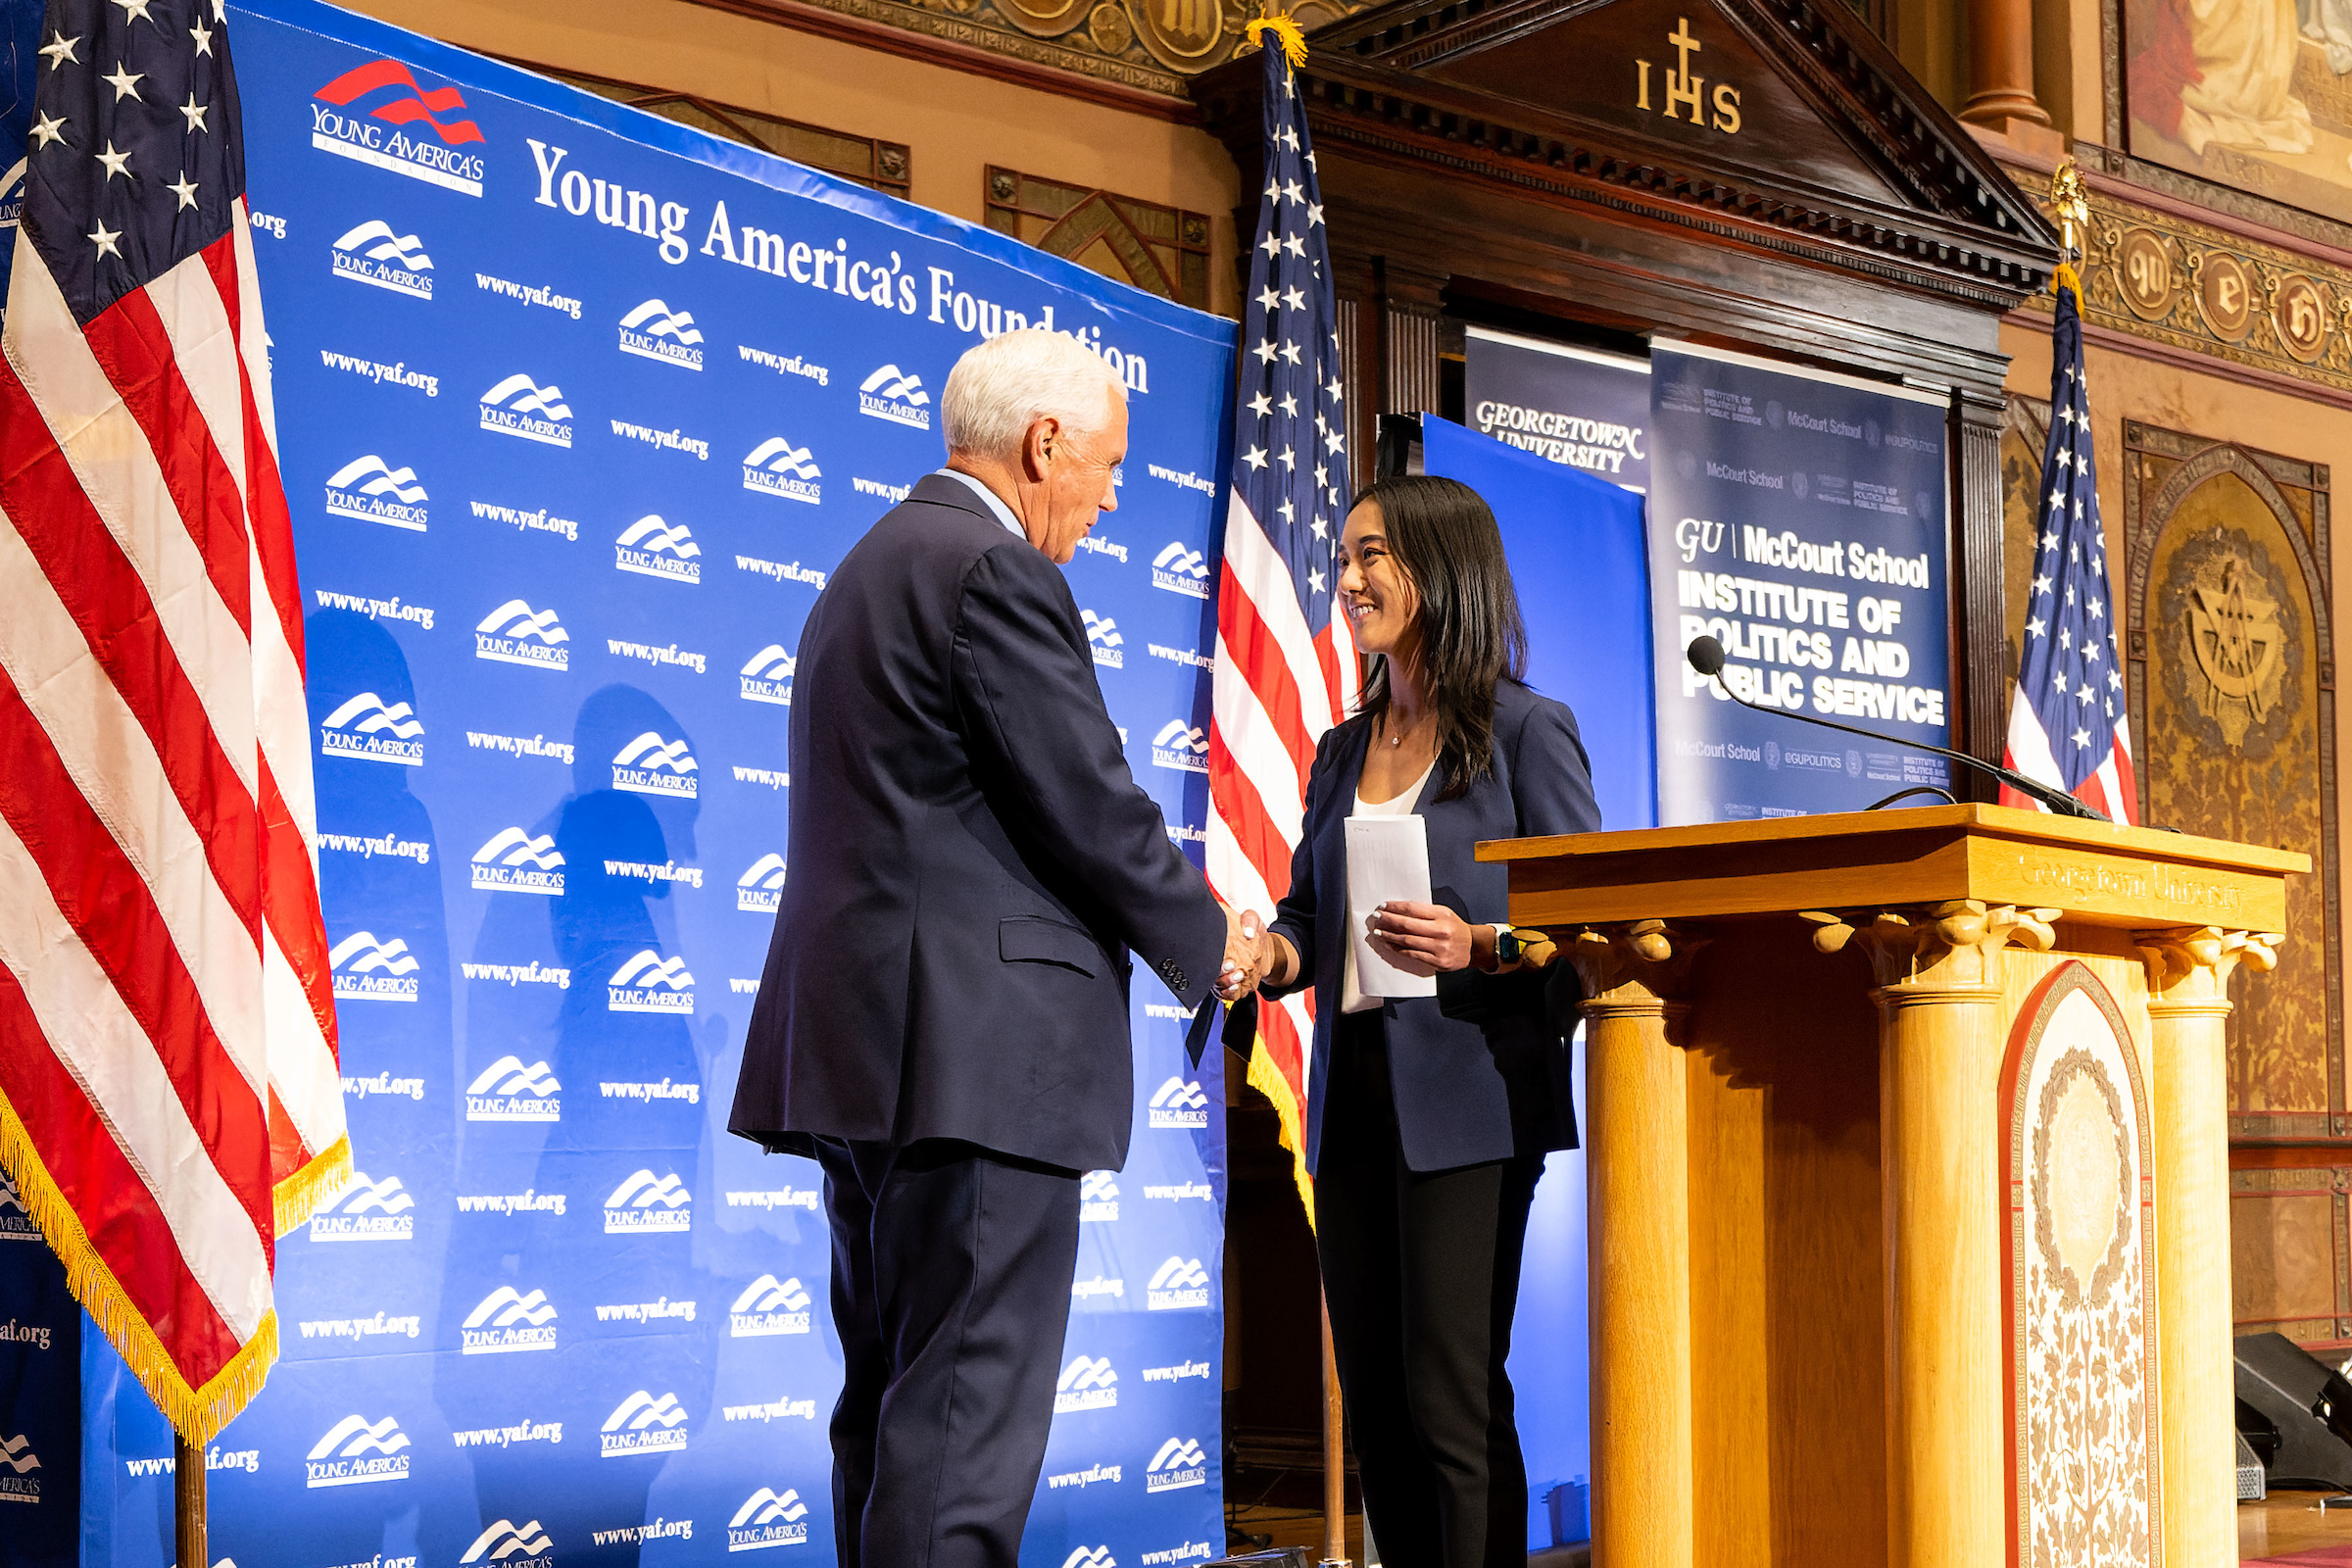 Mike Pence shakes the hand of a young woman behind a podium in front of a banner that says "Young America Foundation"